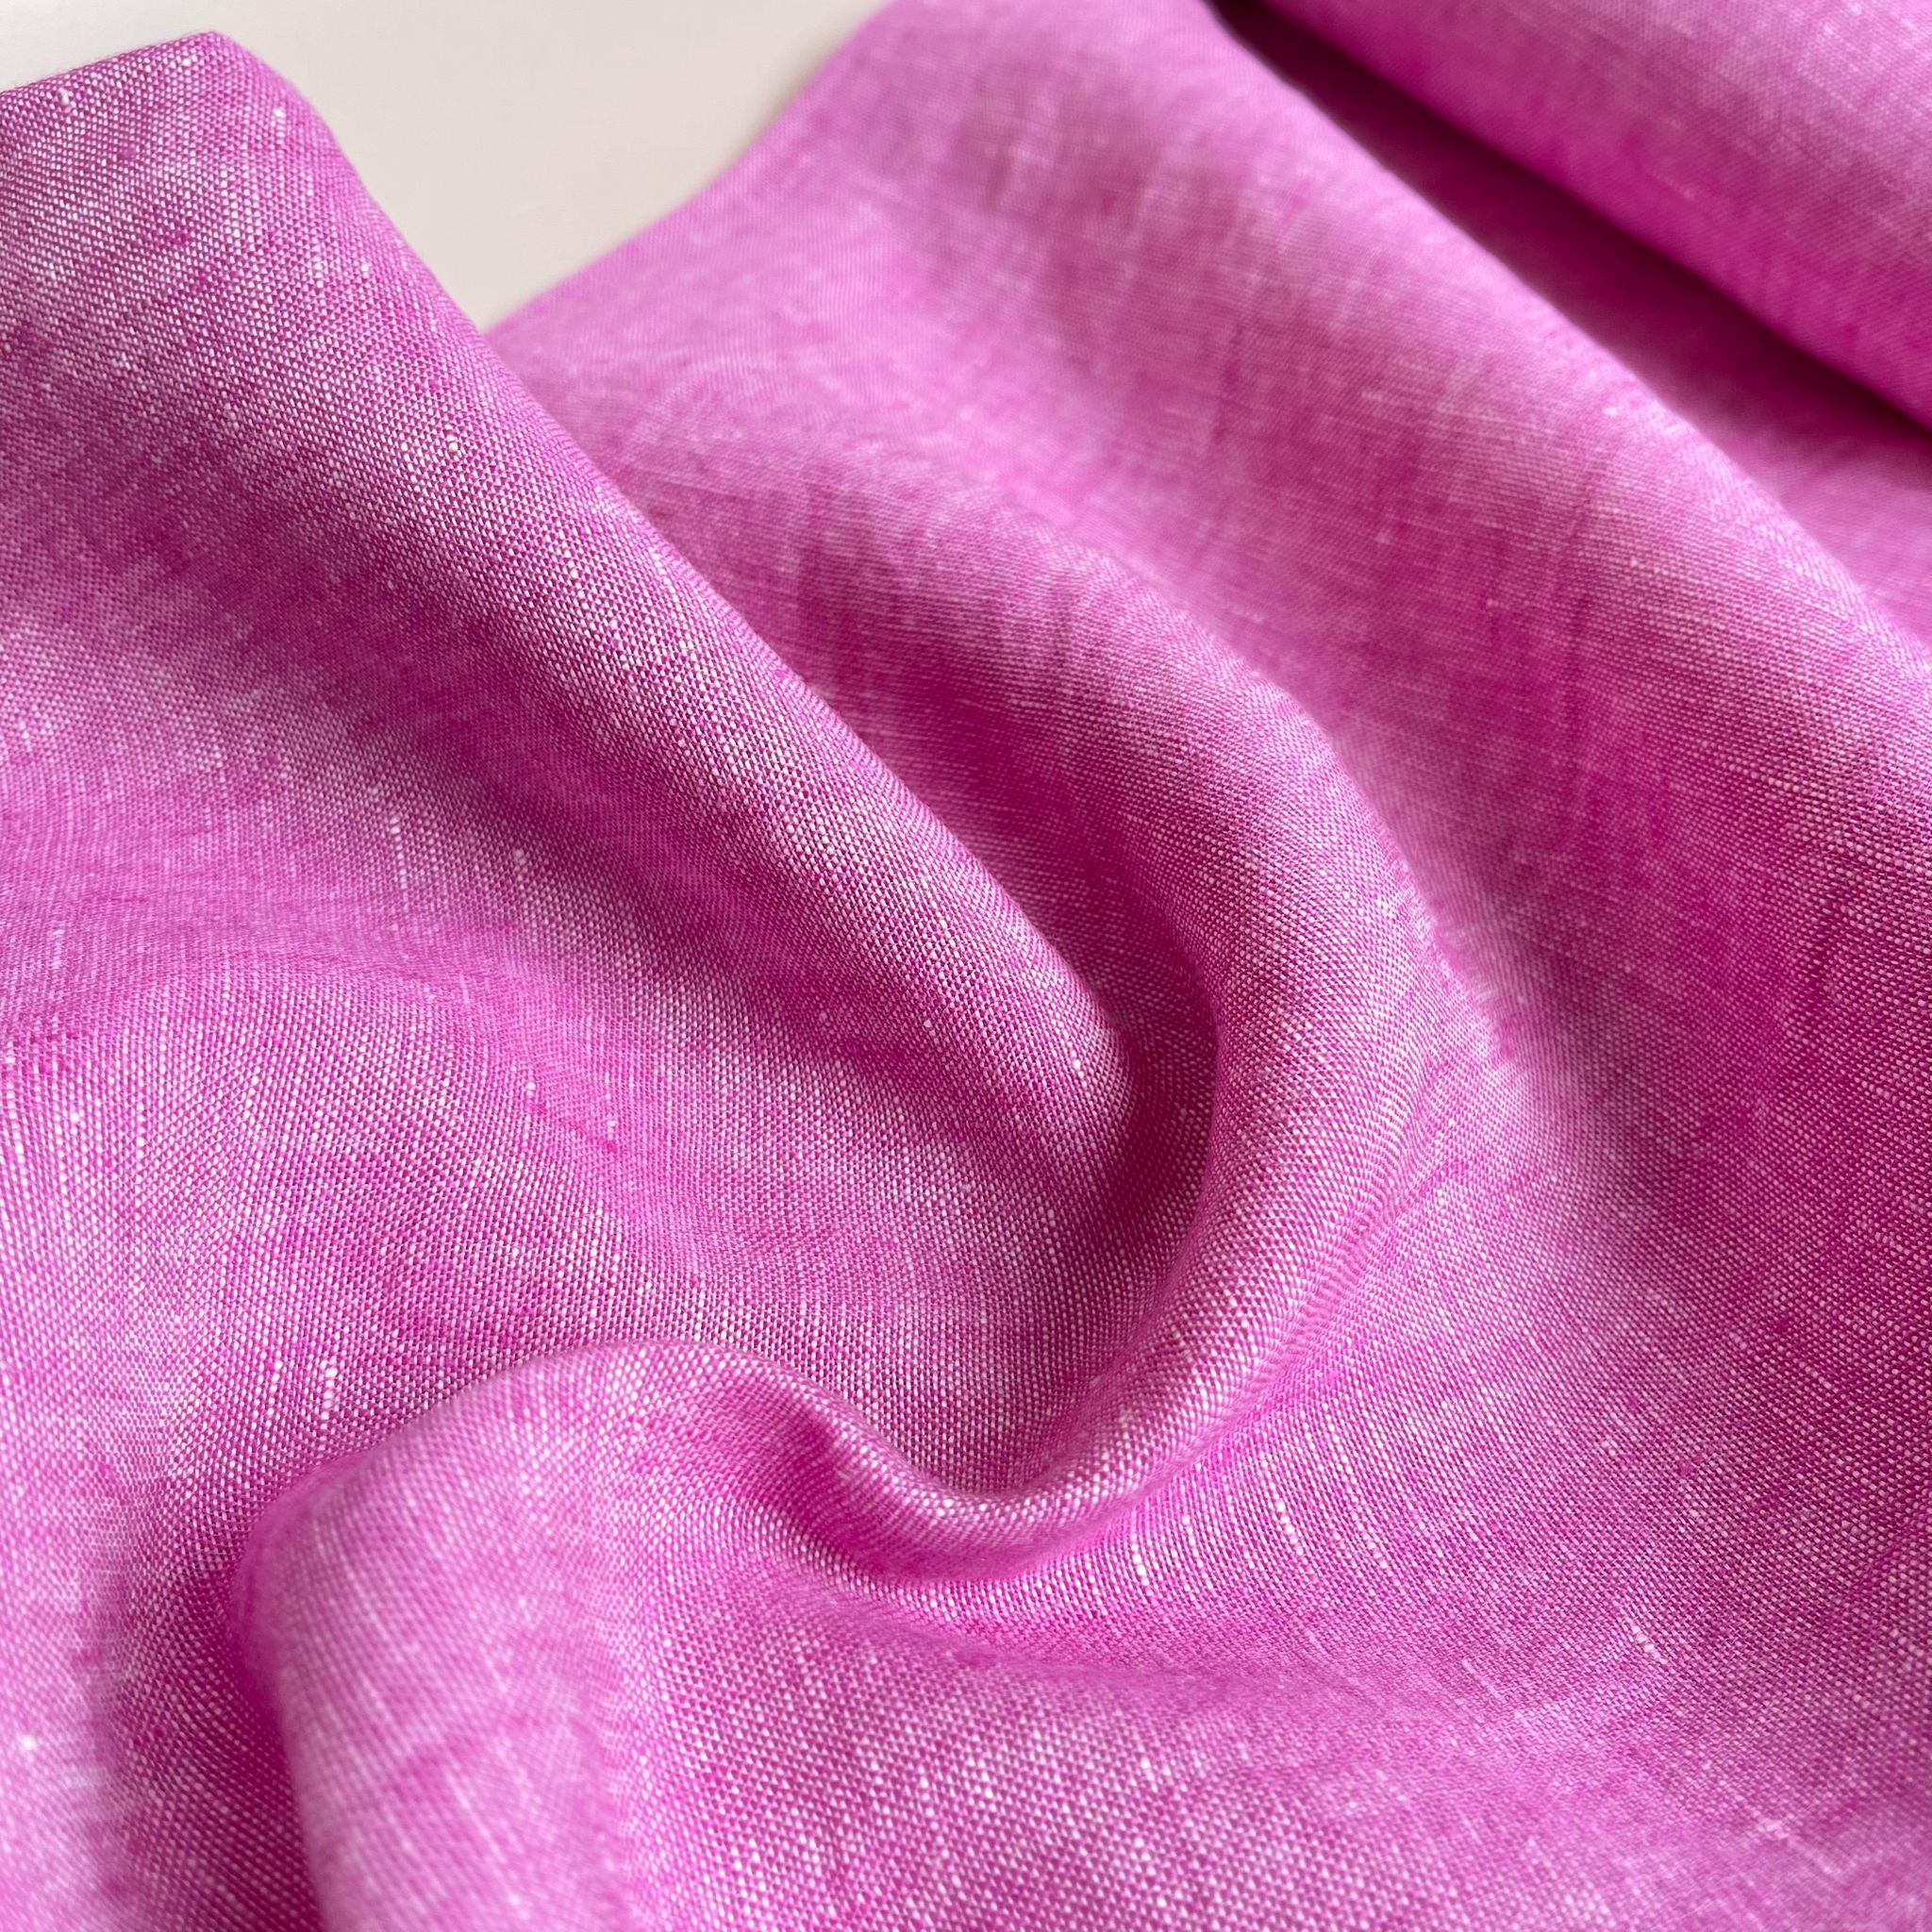 REMNANT 0.89 Metre - Fuchsia Yarn Dyed Pure Linen Fabric